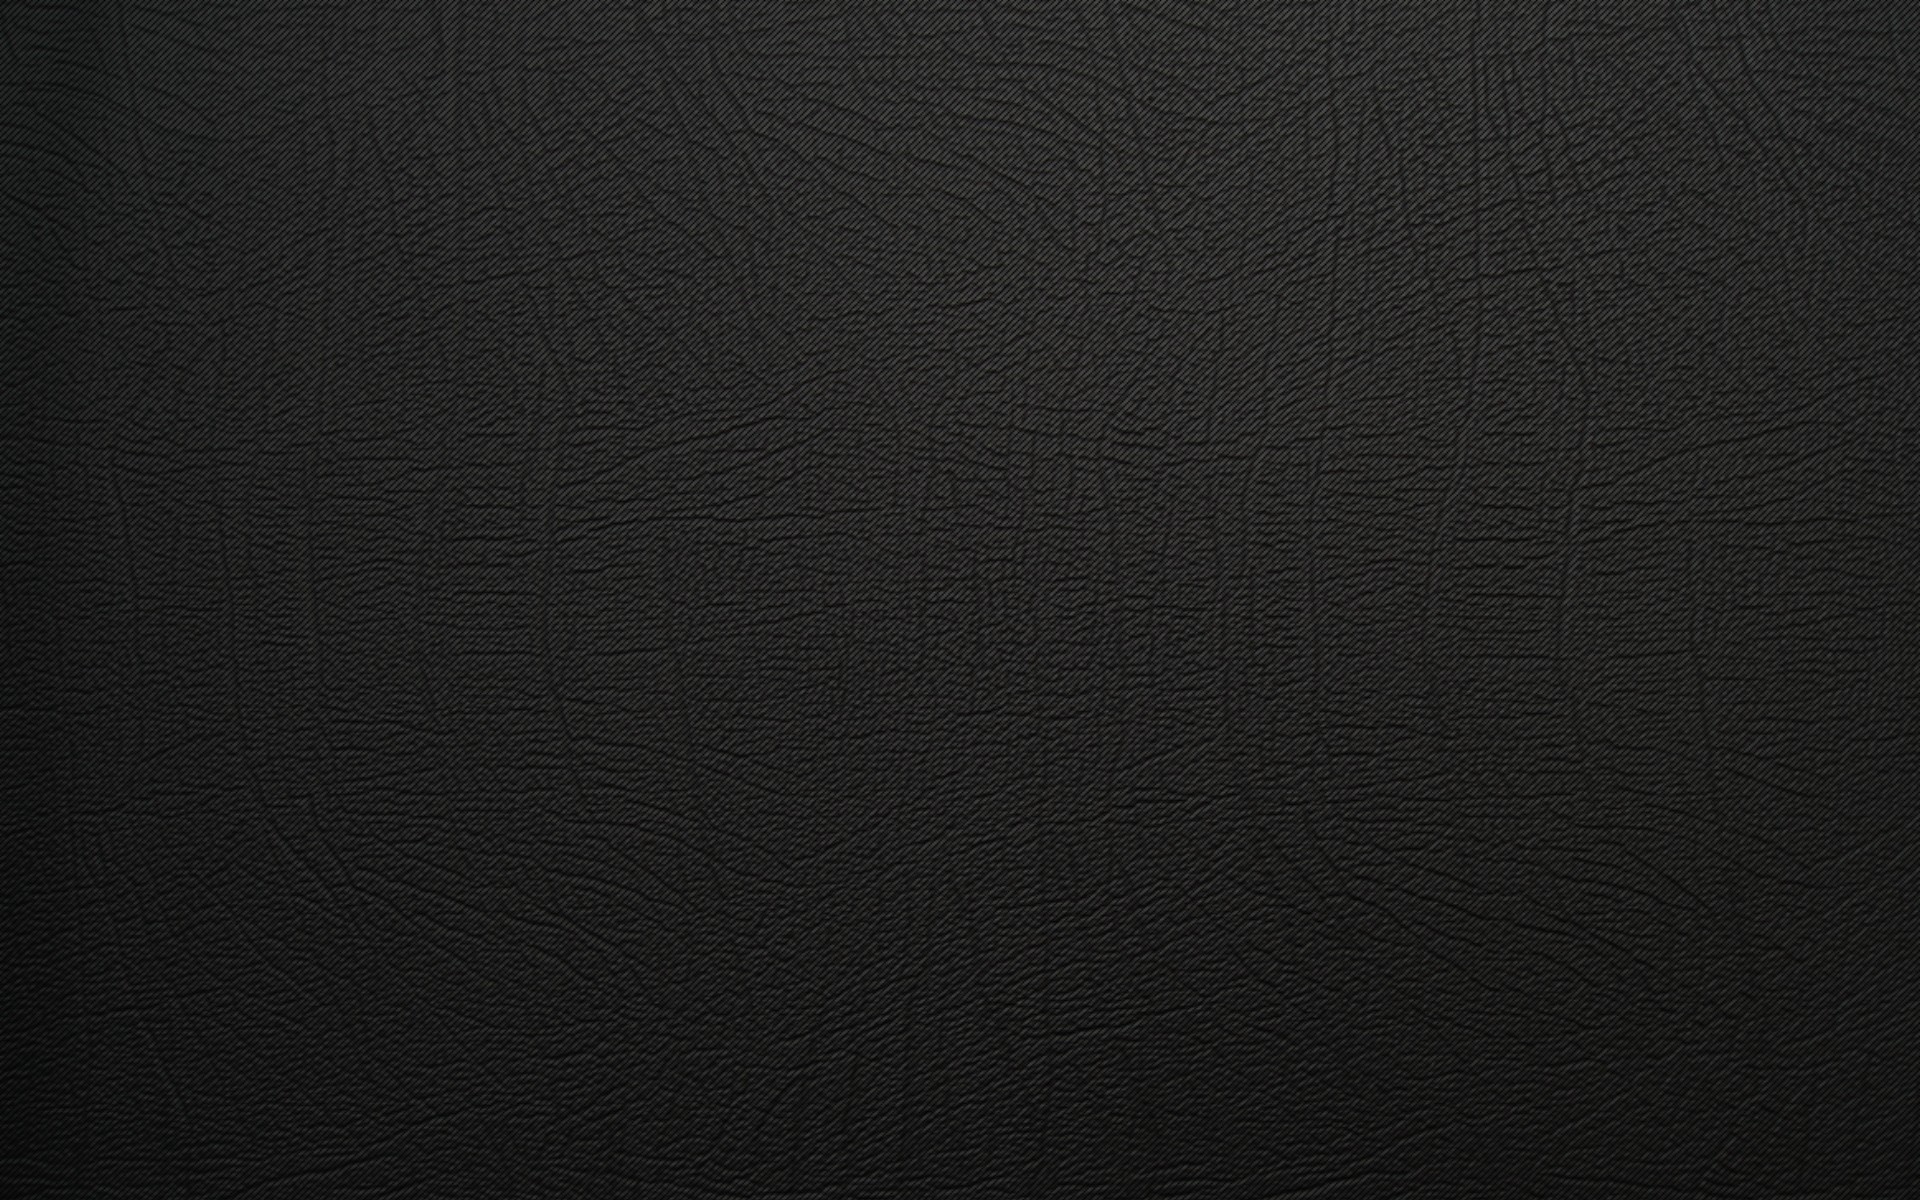 Free download Leather Backgrounds Wallpaper 1920x1200 Leather